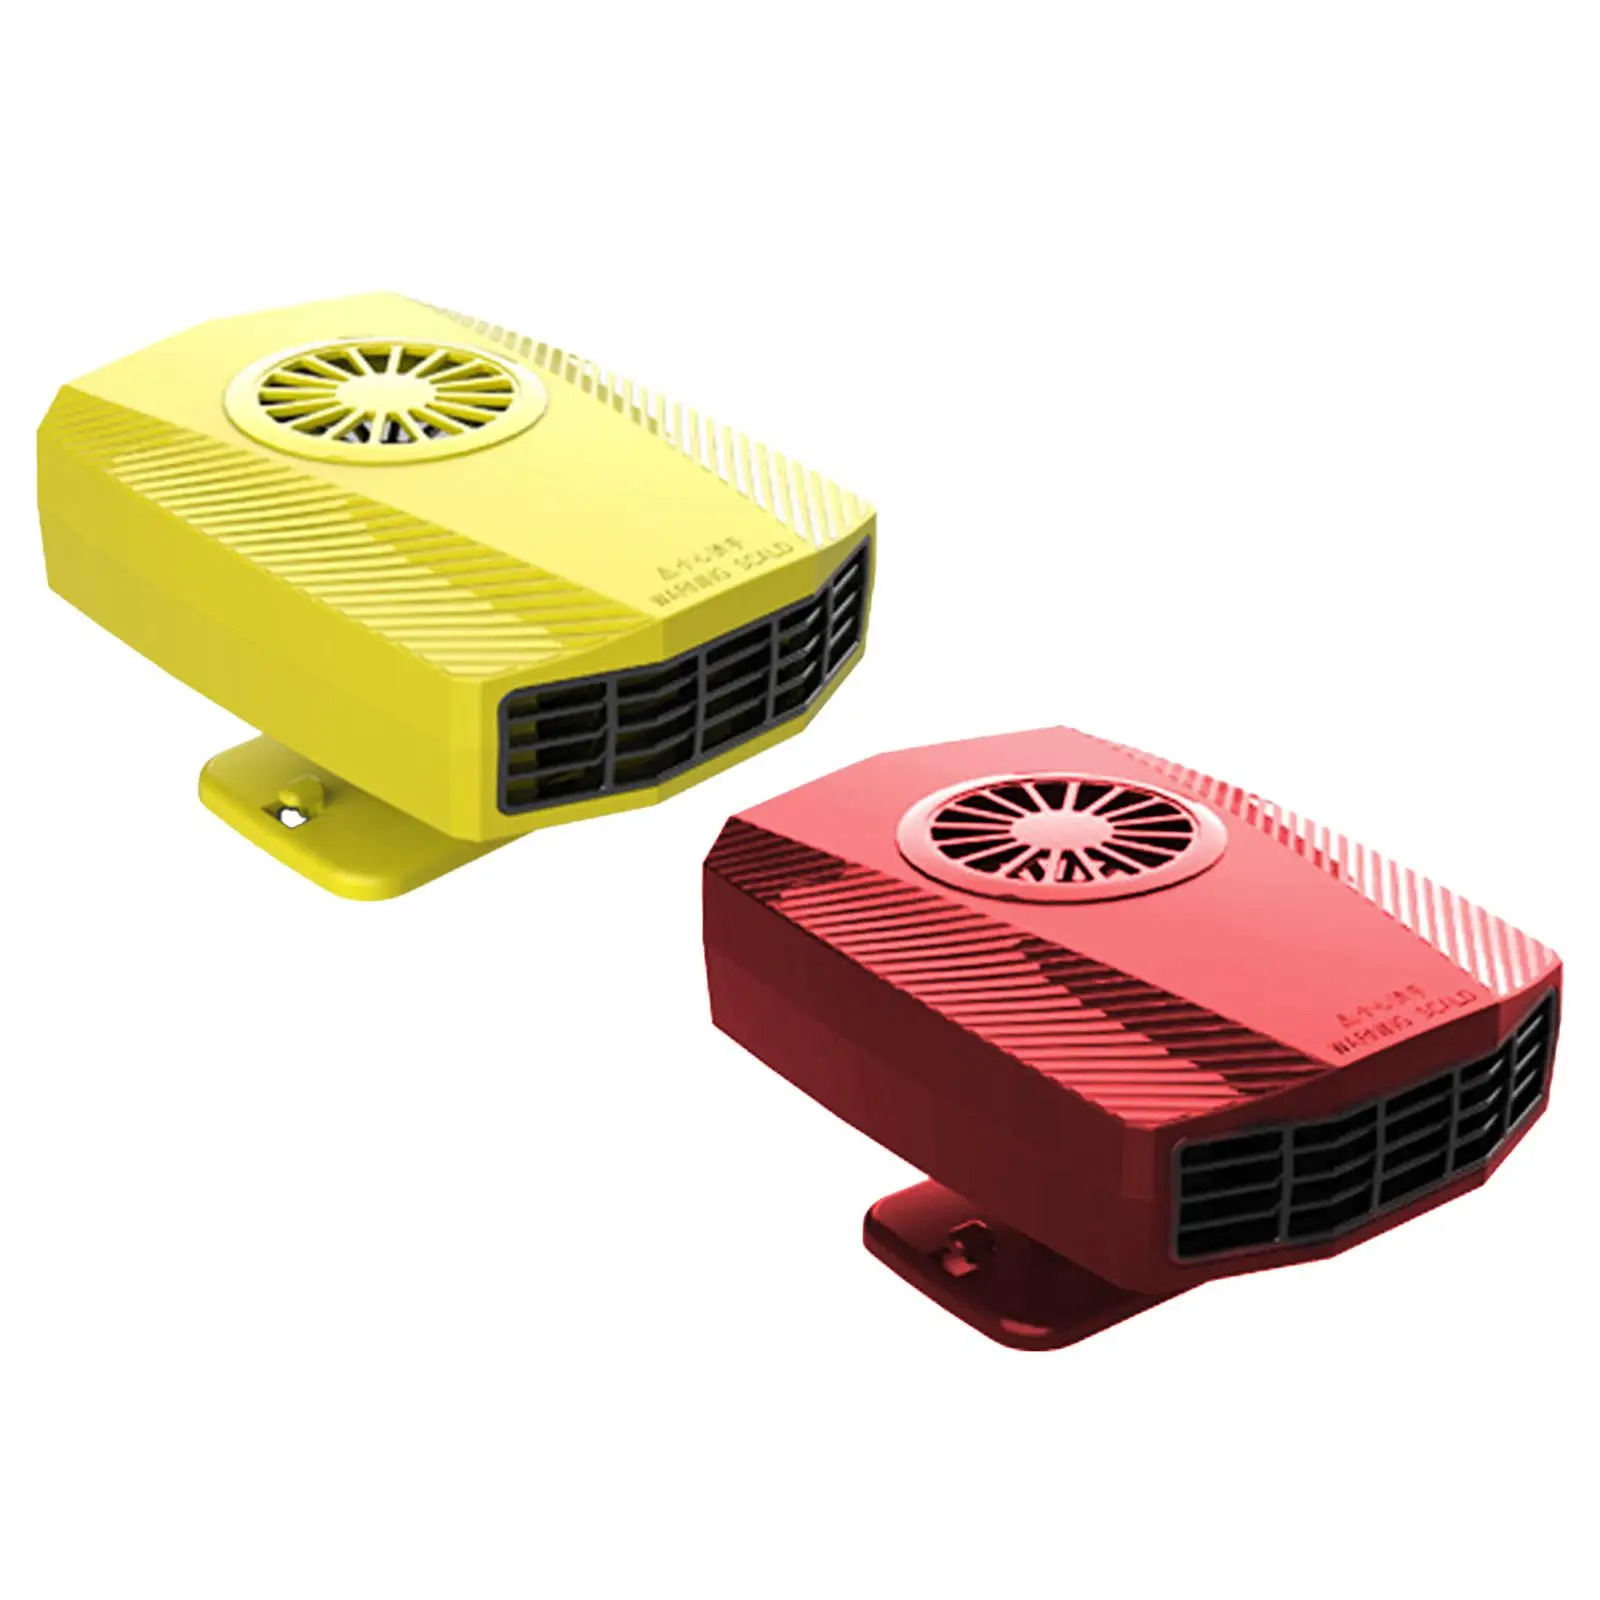 Car Heater Fan Small Low Noise Sturdy 2 in 1 Heating and Cooling Fan Windscreen Defogger for Taxis Auto Jeeps Truck Travel